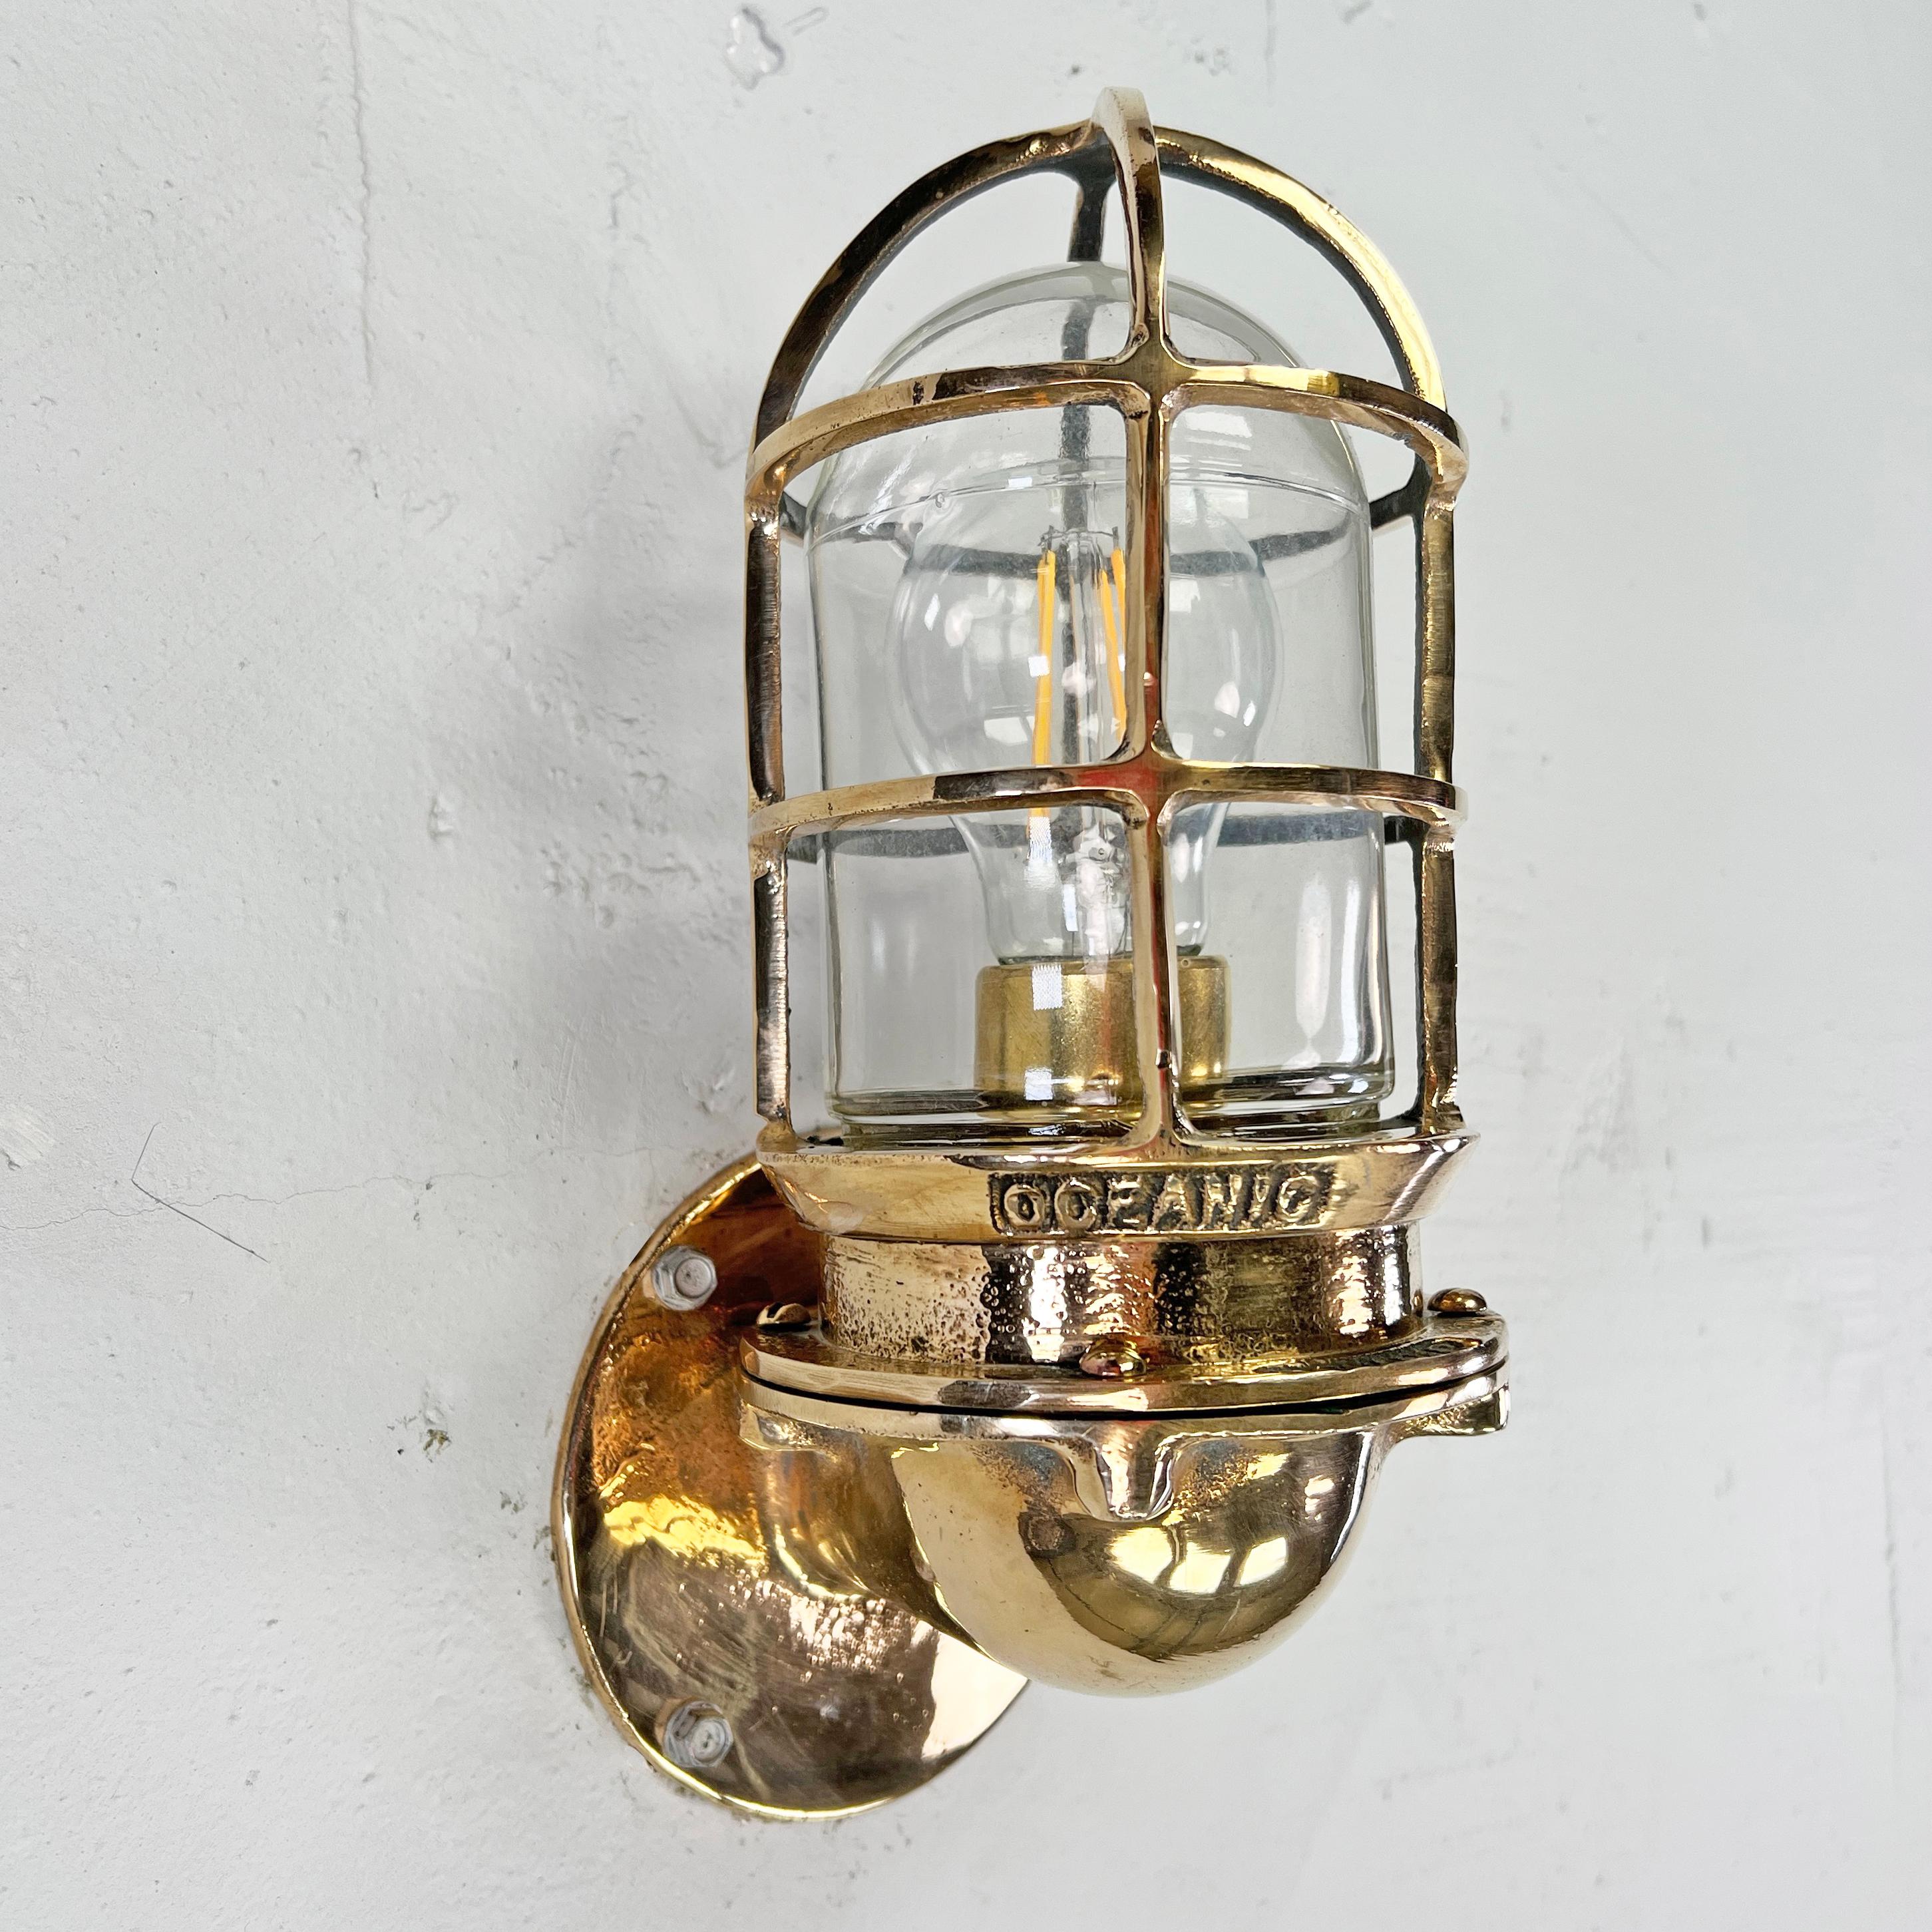 1960's American Cast Bronze & Glass Wall Sconce with Cage by Oceanic UL For Sale 8